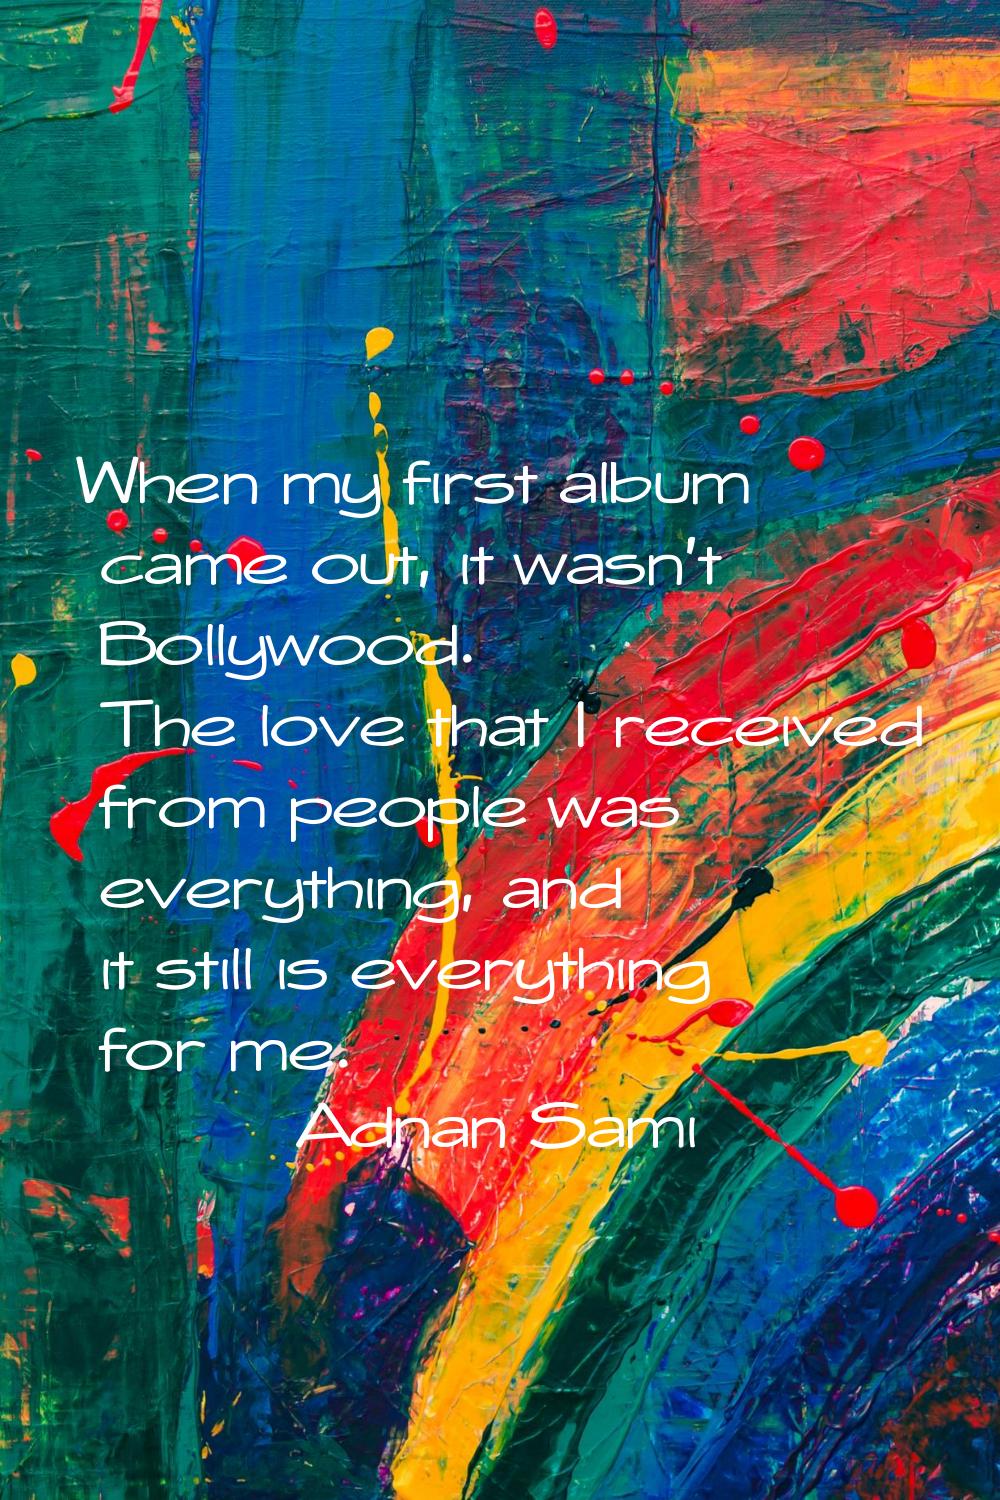 When my first album came out, it wasn't Bollywood. The love that I received from people was everyth